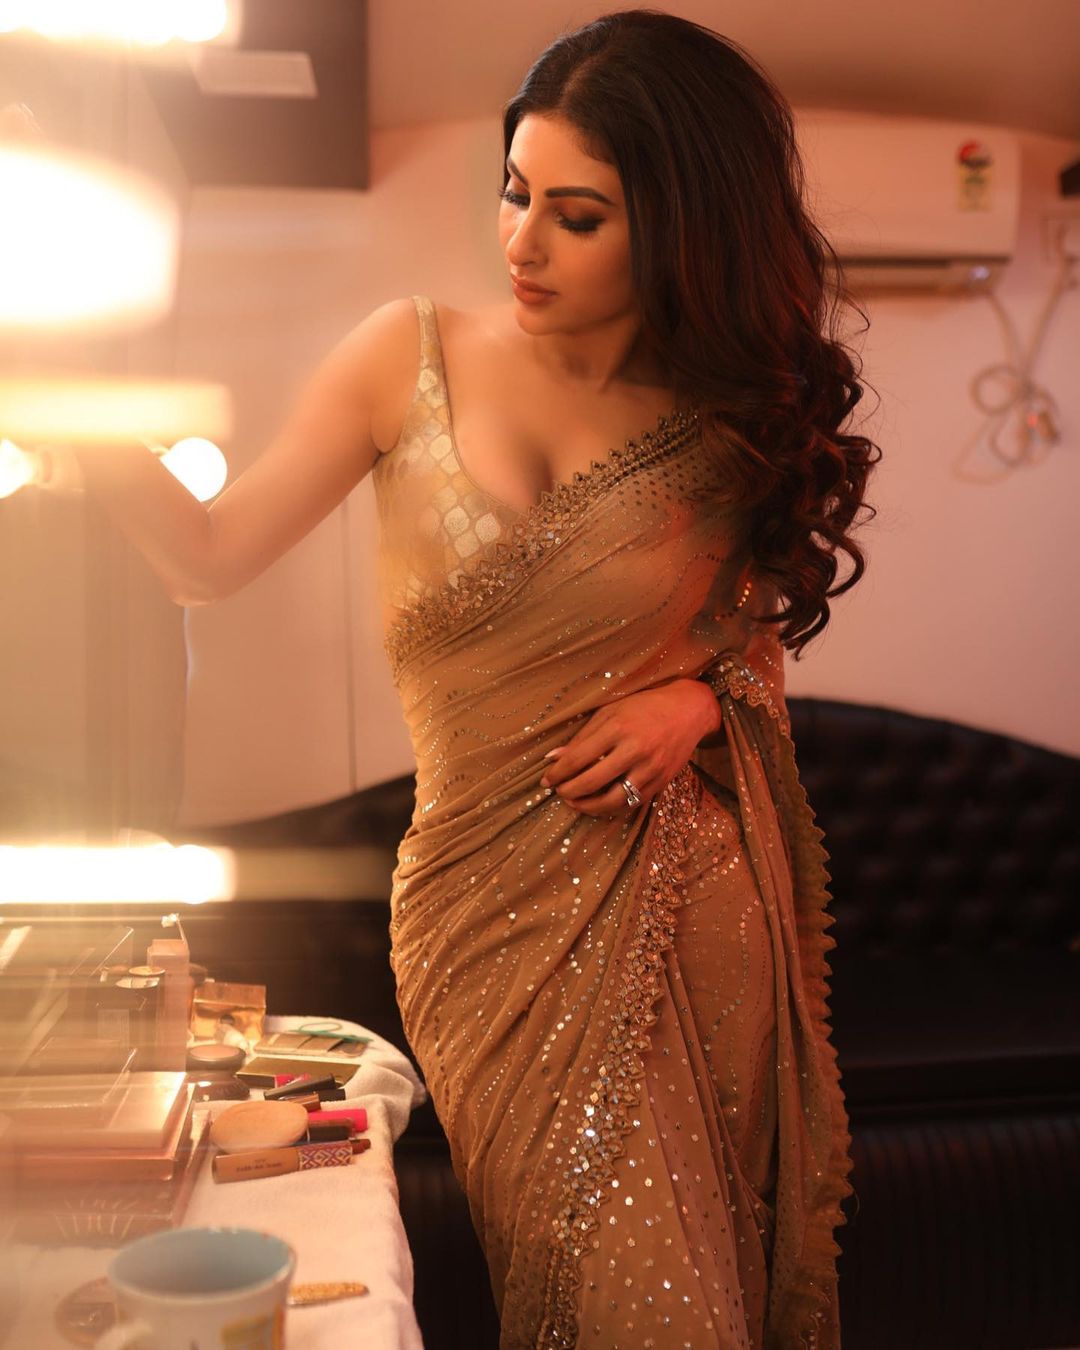 Mouni Roy's bright saree on shiny body, fans injured by bold look 12379